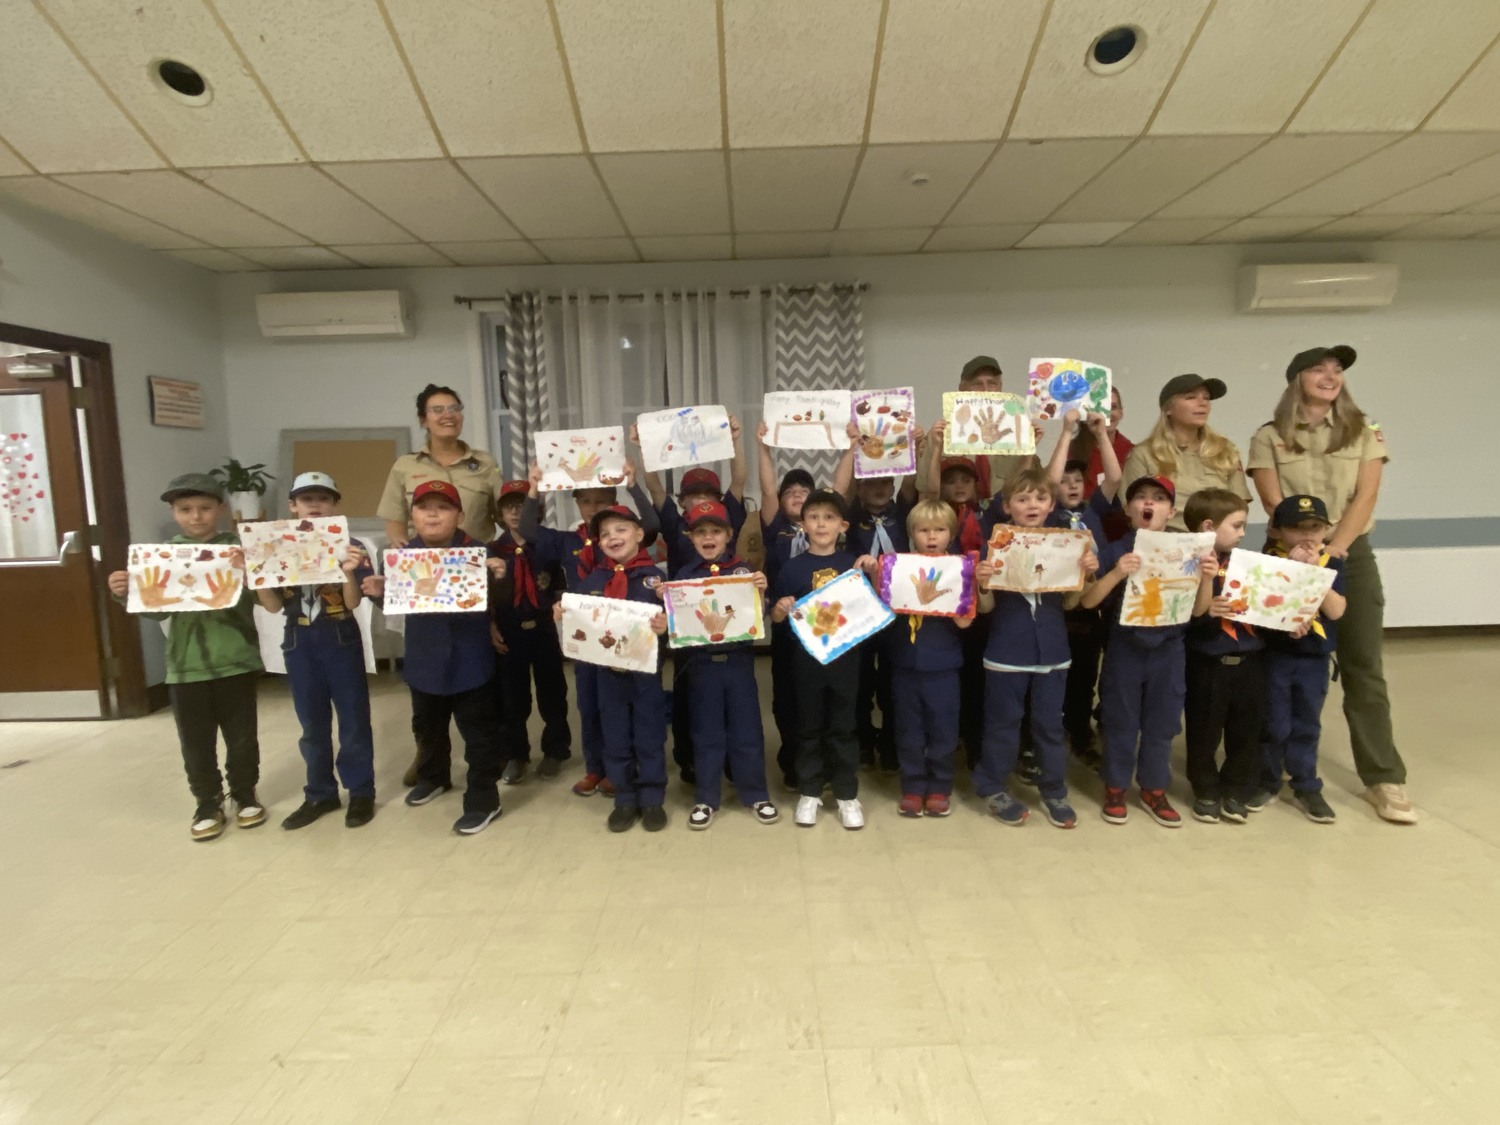 Hampton Bays Cub Scout Pack 483 recently made placemats for the Town of Southampton Senior Citizens Center for Thanksgiving. In addition, the Scouts collected nonperishable food items to be donated to the food pantry at St. Rosalie's Church. The Scouts meet at the Anderson Warner Hall in Hampton Bays. COURTESY CUB SCOUT PACK 483